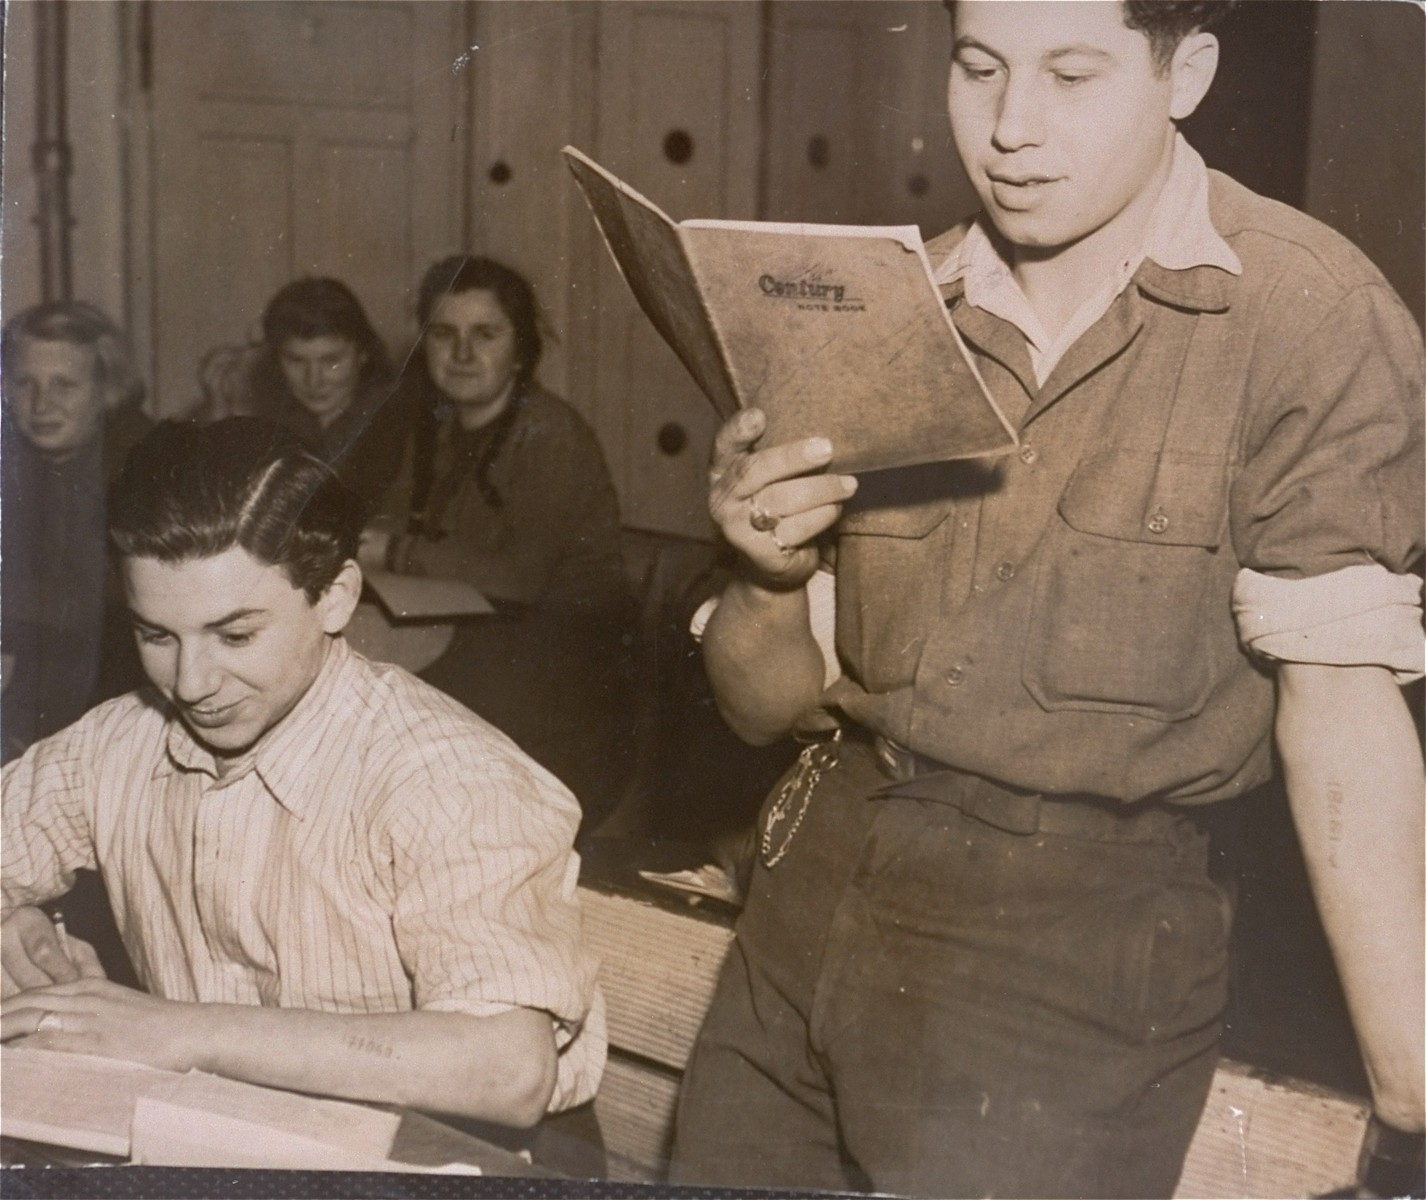 A DP youth reads to his fellow classmates at the Kloster Indersdorf DP children's center.

Standing on the right is Jakob Bulwa, a child survivor of Auschwitz and Flossenbuerg.